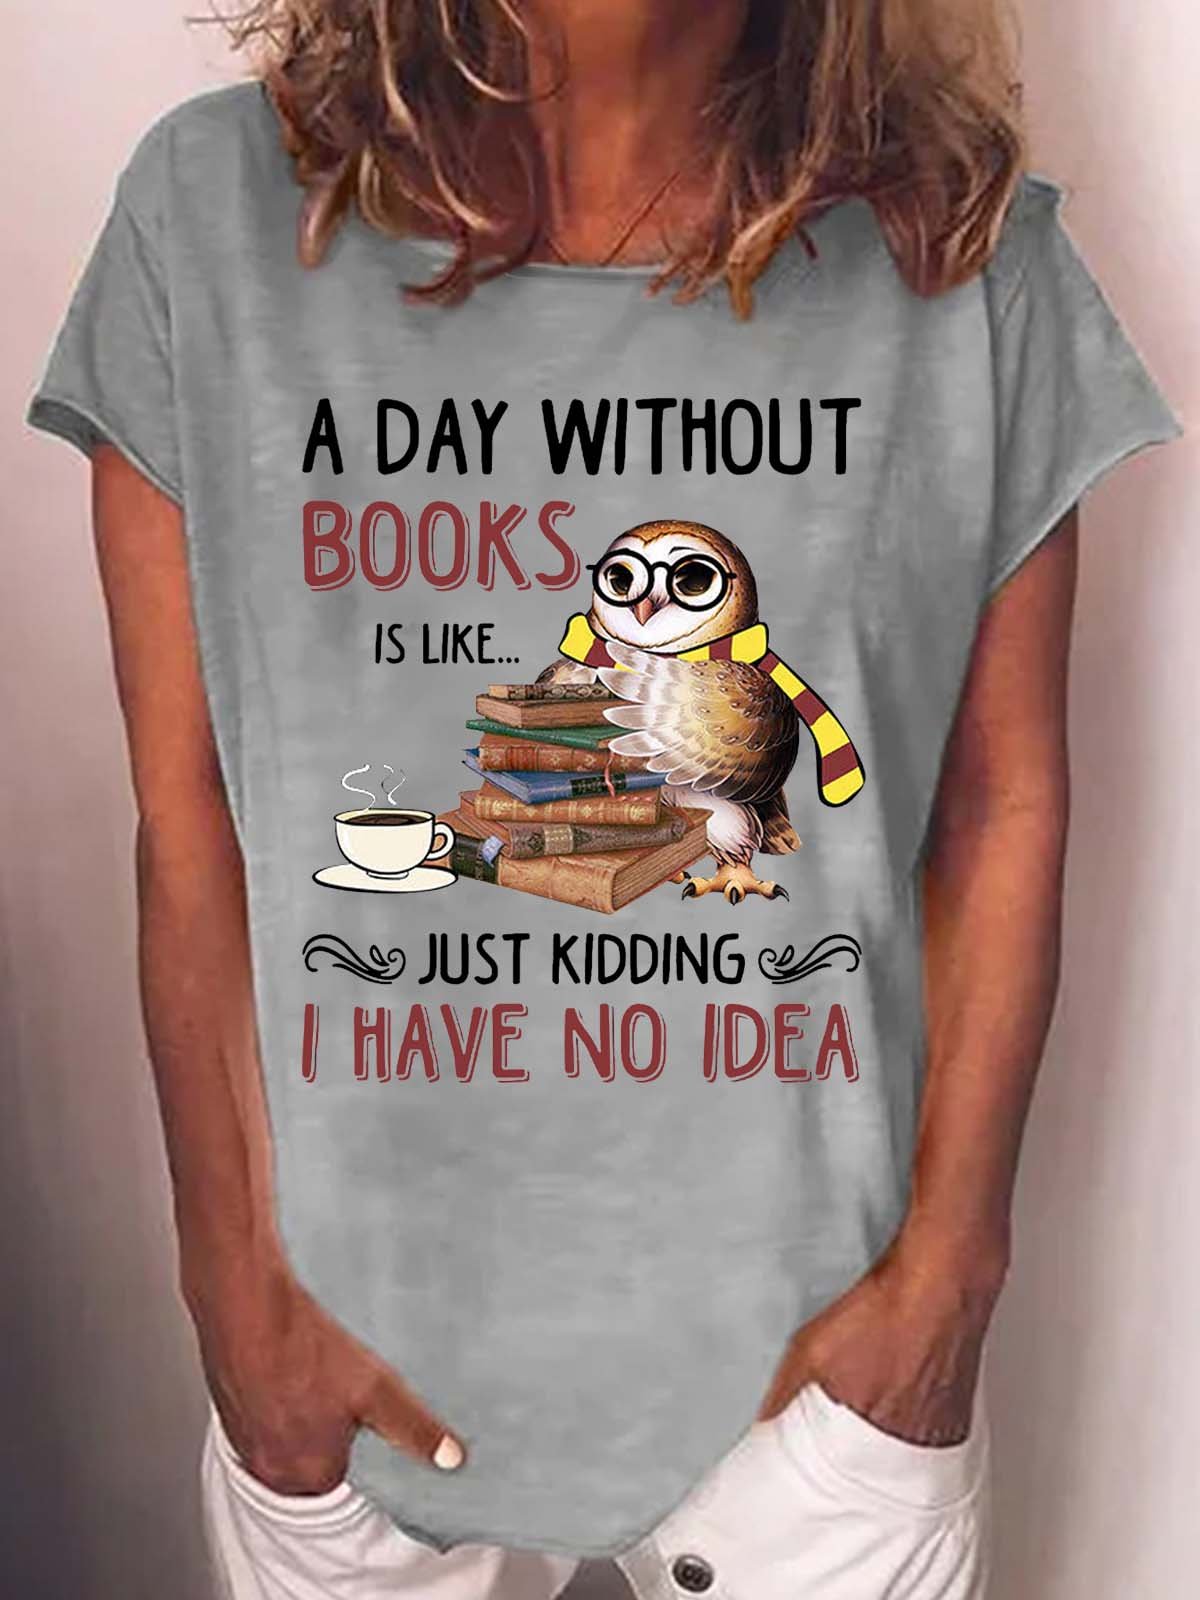 Women's A Day Without Books Owl Print Casual Letters T-Shirt